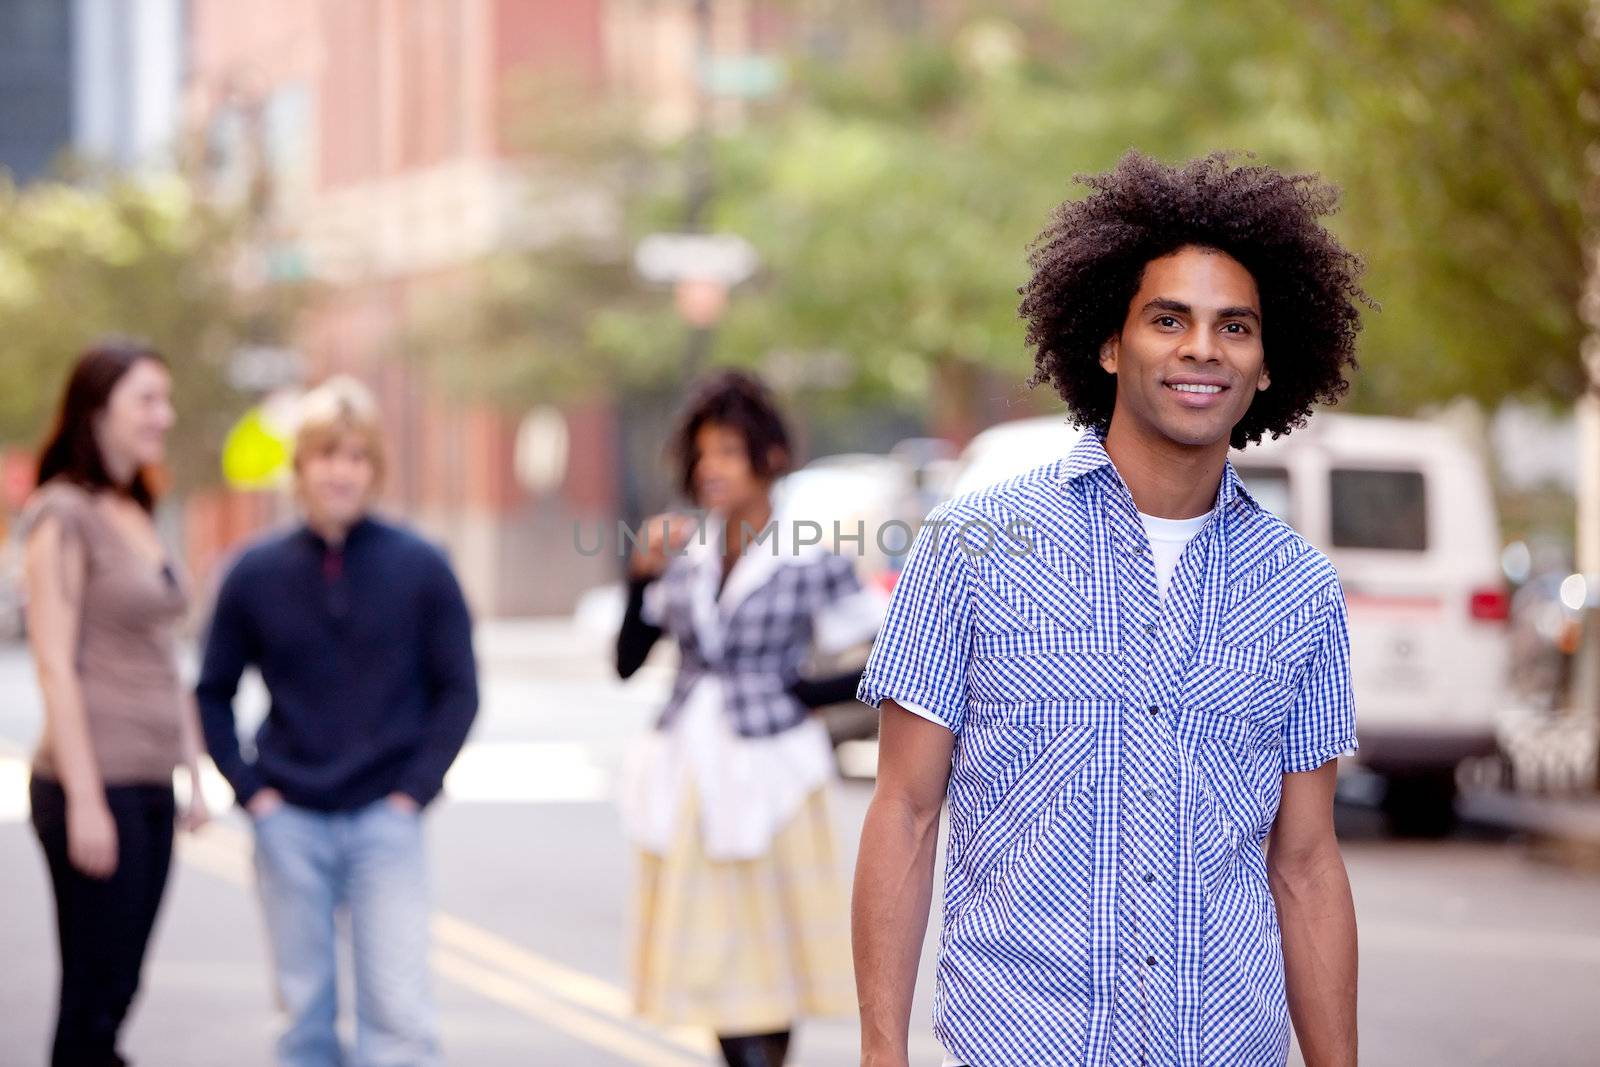 A young male in a city setting with friends in the background